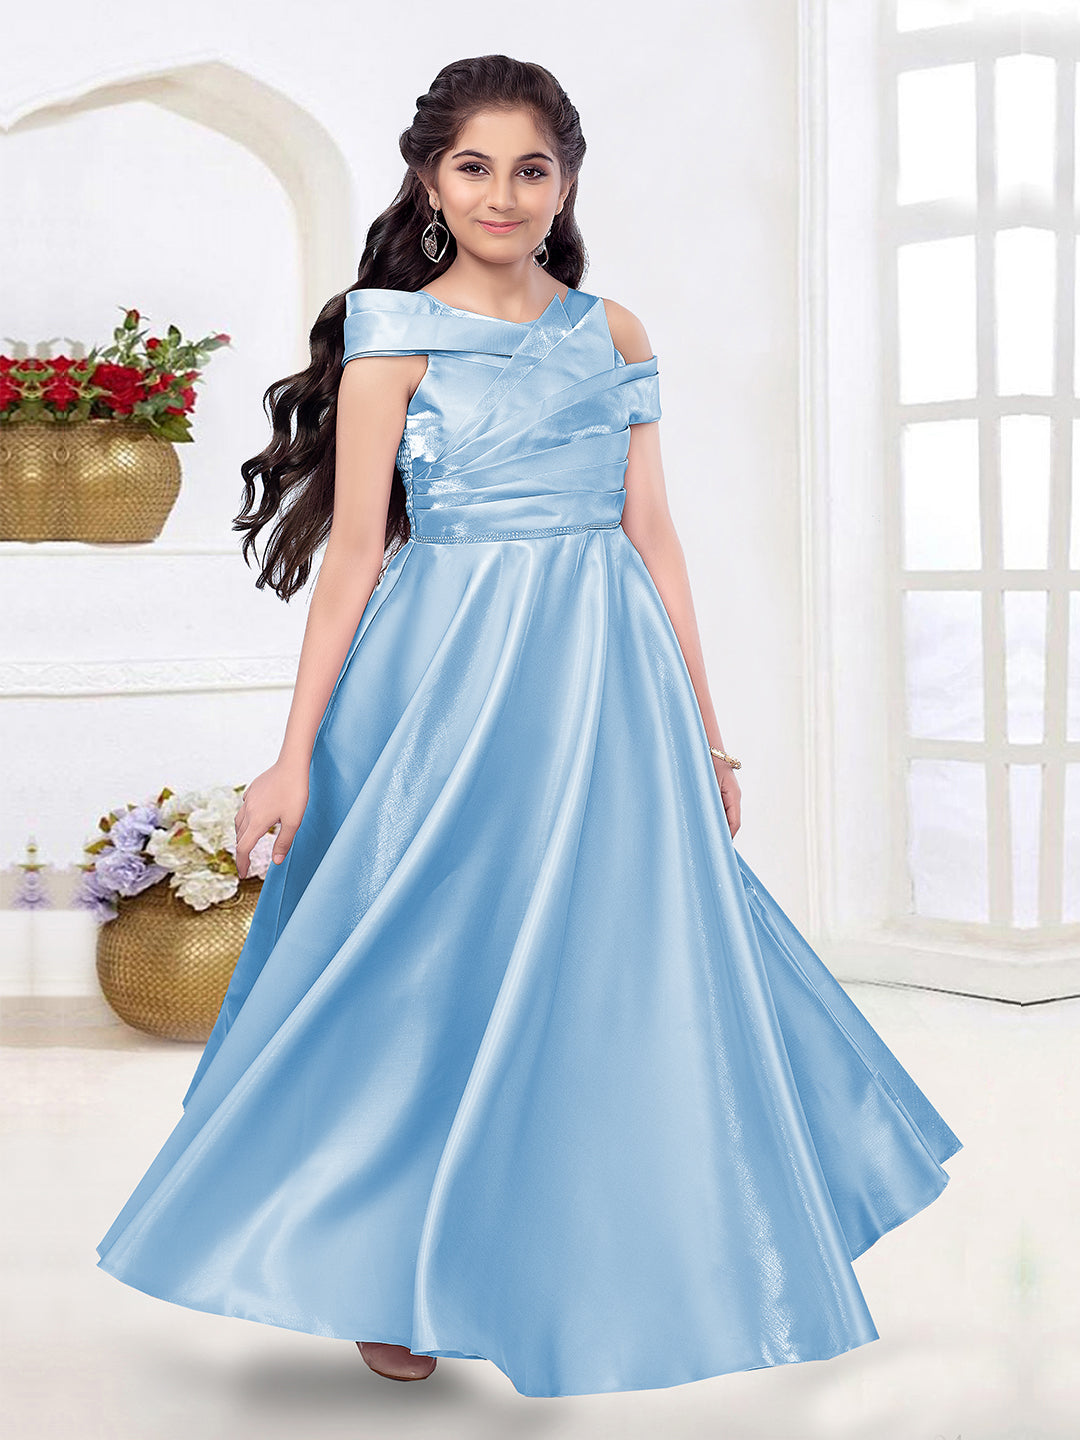 Sky Blue Satin One Shoulder One Shoulder Evening Gown With Long Pleats  Elegant Party Wear Prom Gown For 2022 From Donnaweddingdress12, $80.49 |  DHgate.Com